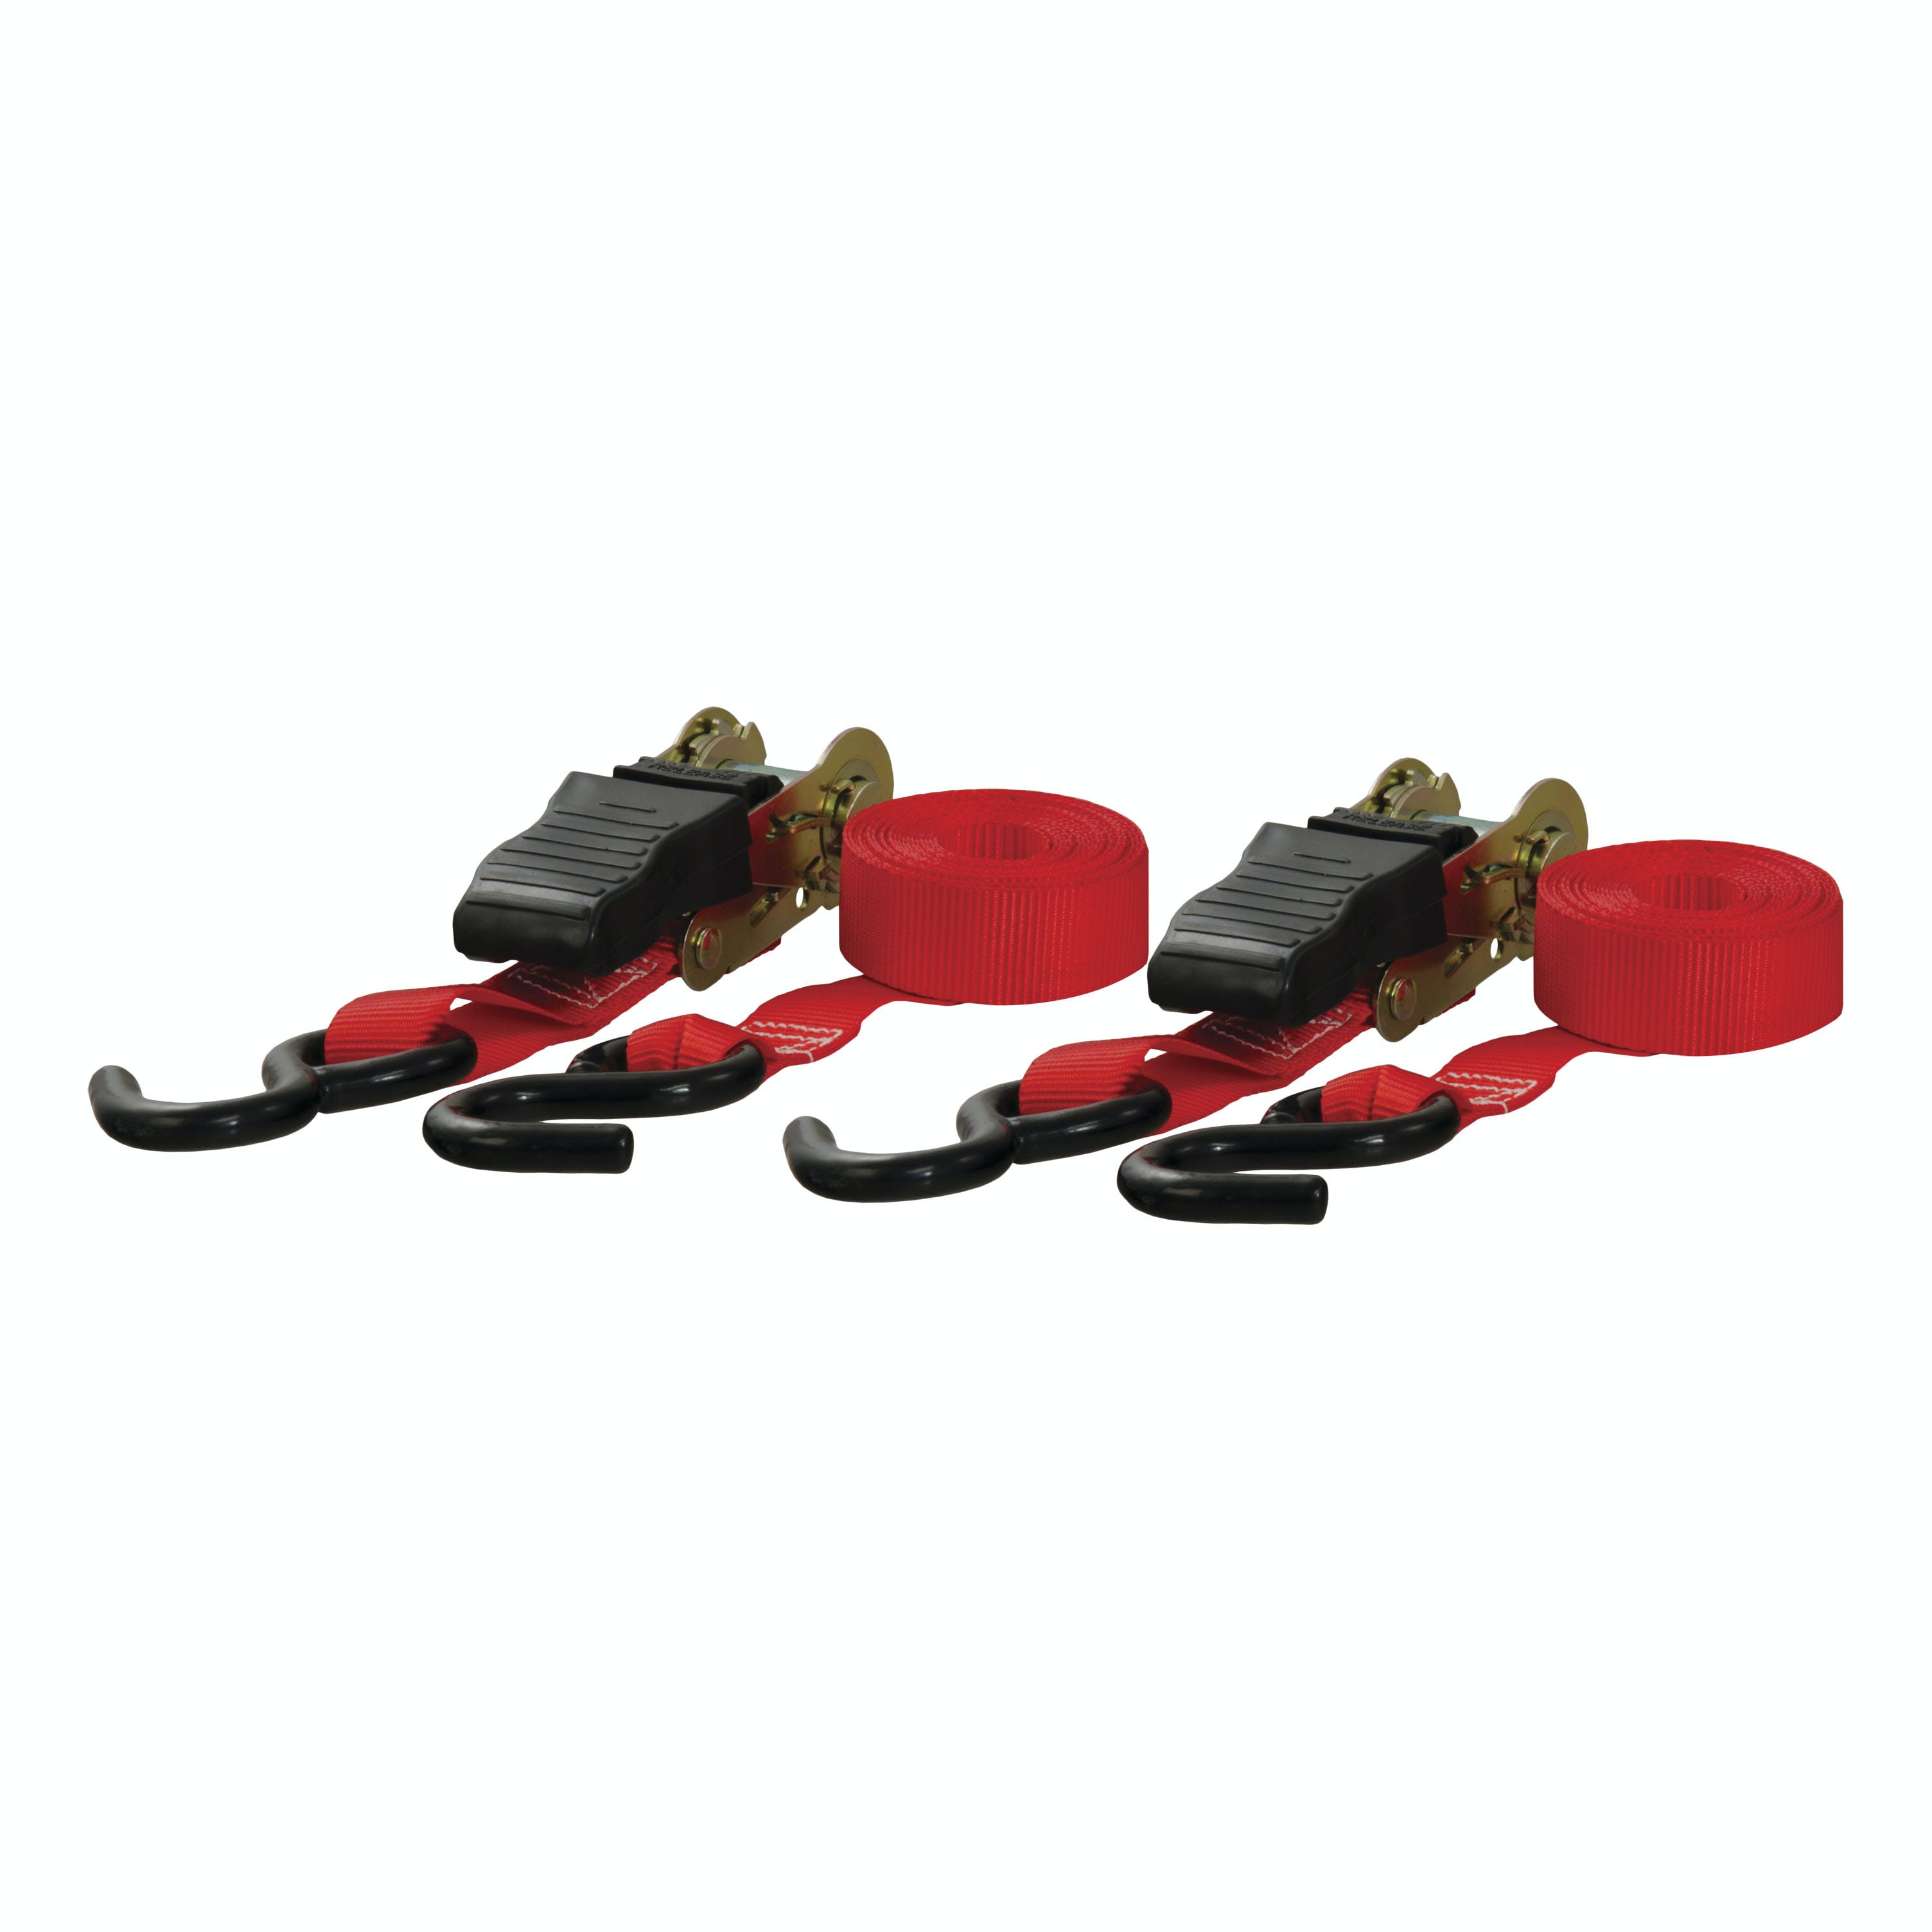 CURT 83001 10' Red Cargo Straps with S-Hooks (500 lbs, 2-Pack)